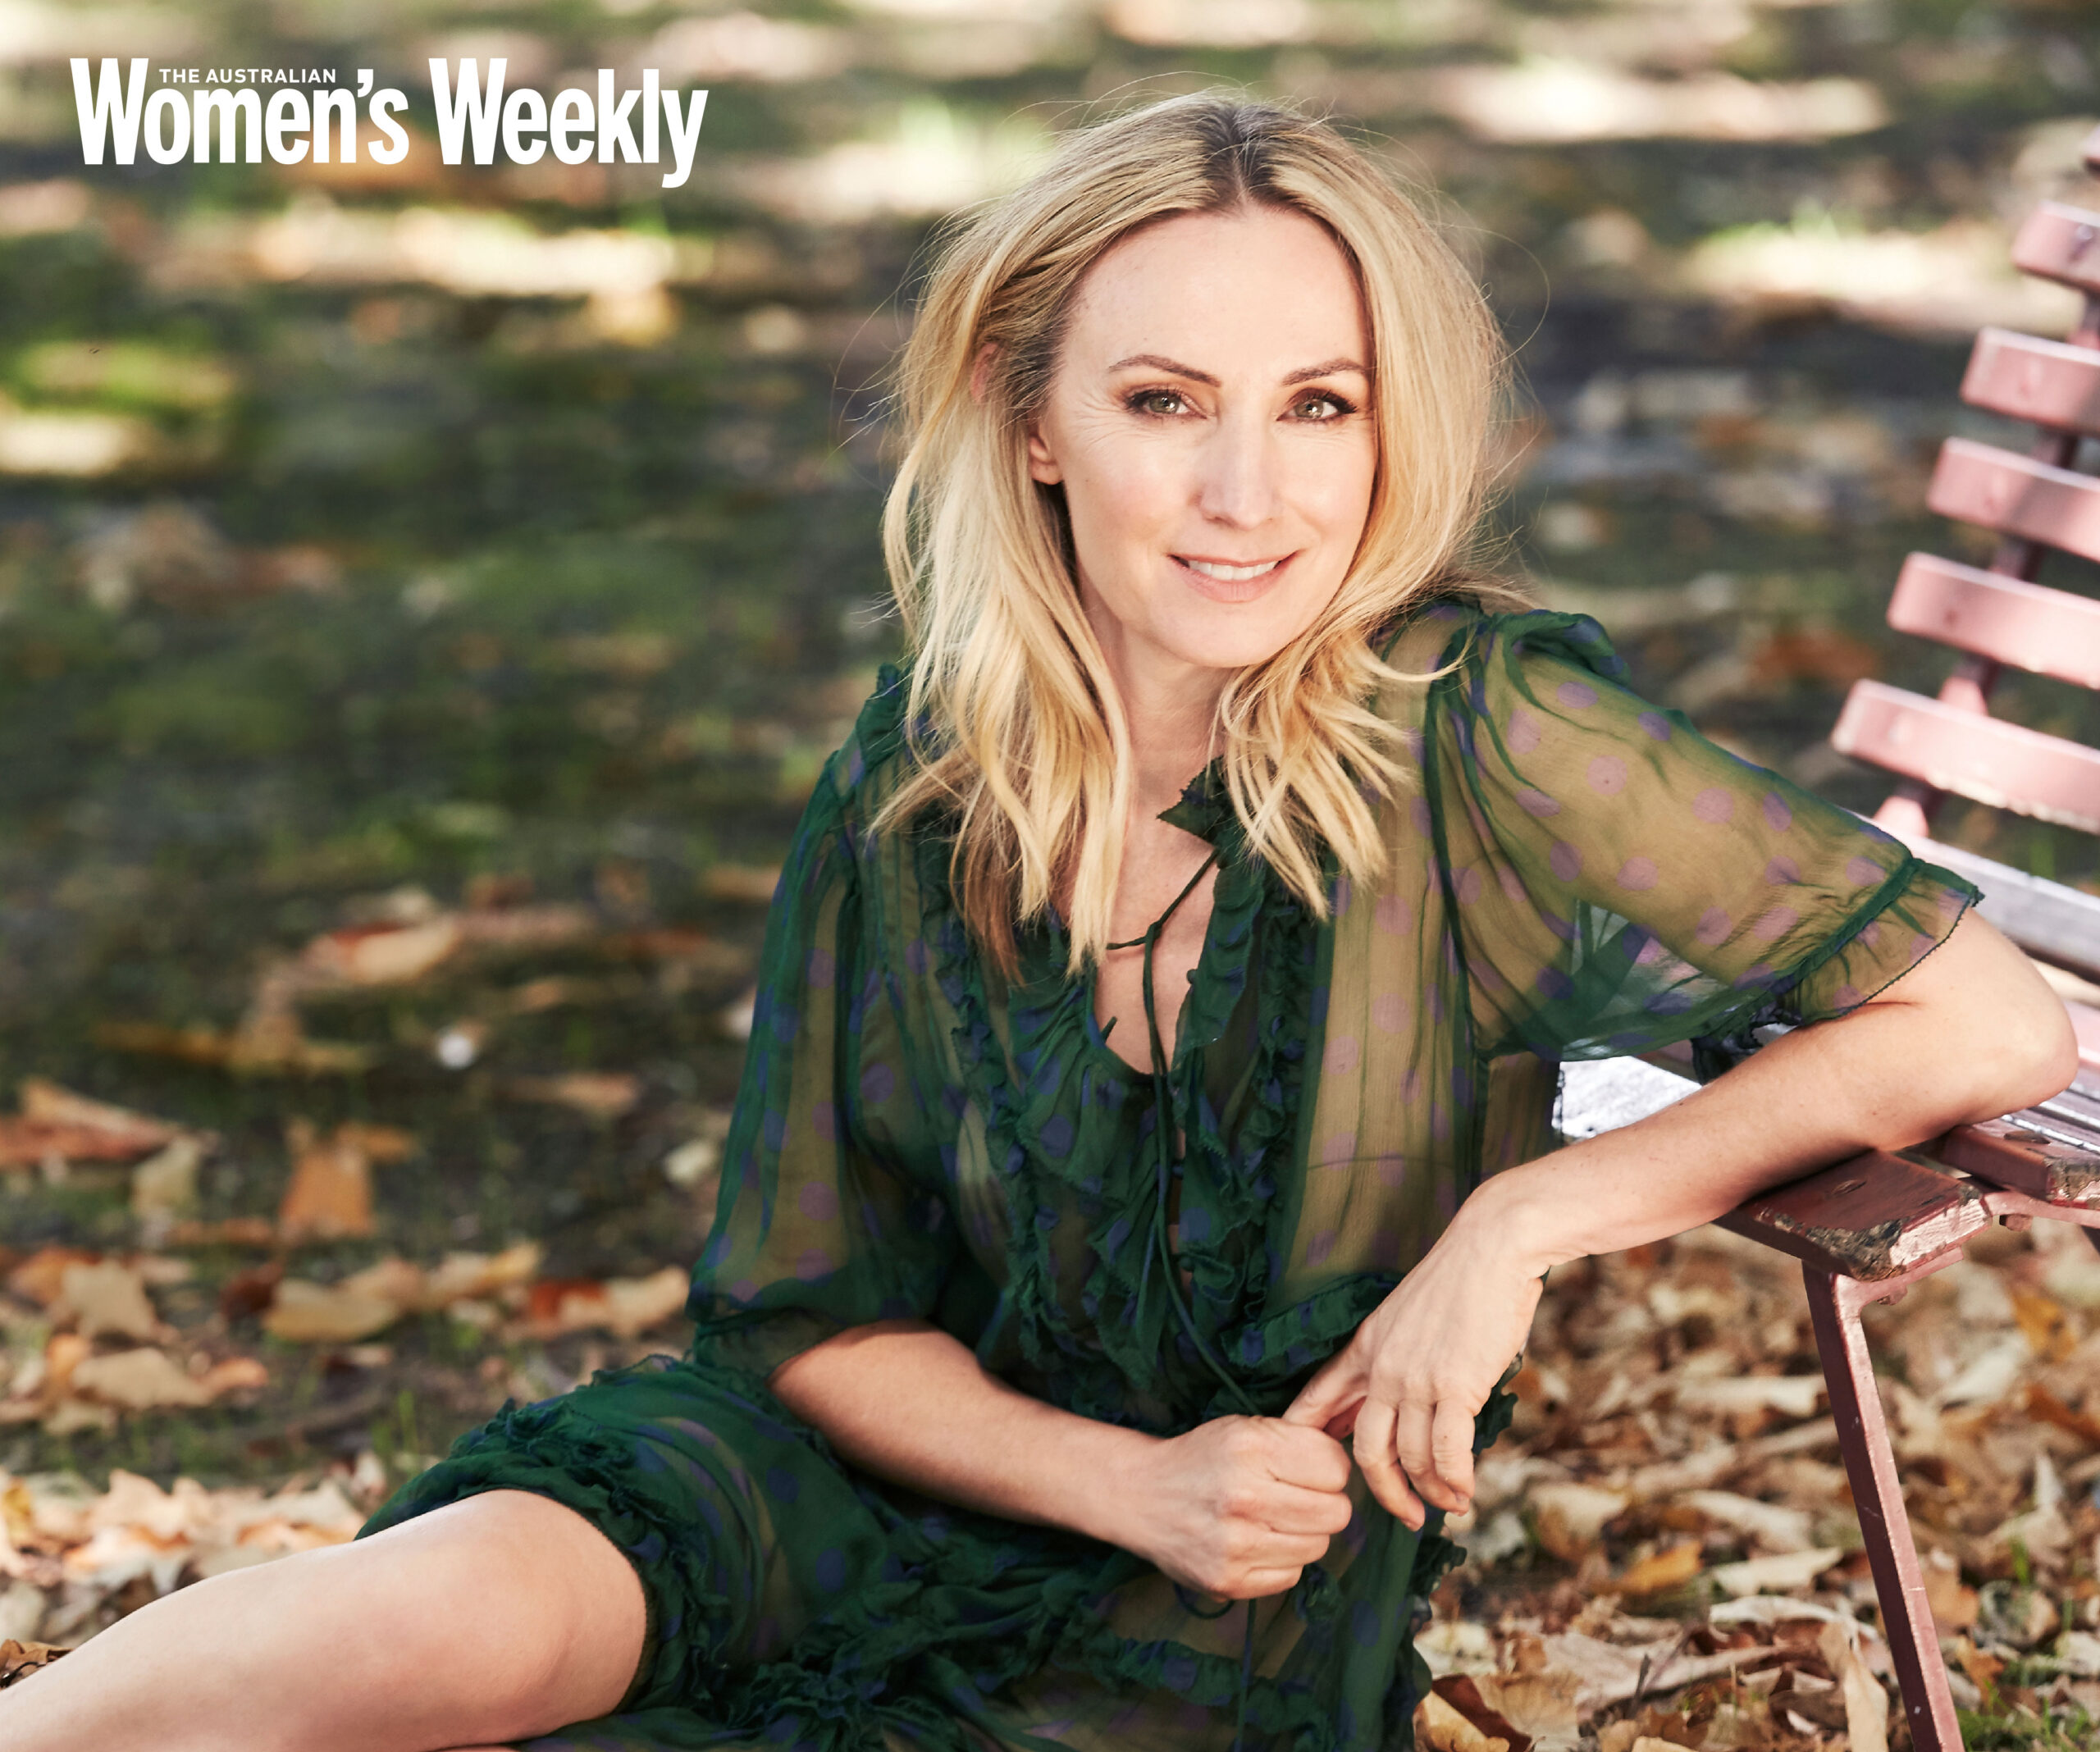 EXCLUSIVE: Lisa McCune opens up about being happily single and co-parenting her very modern family